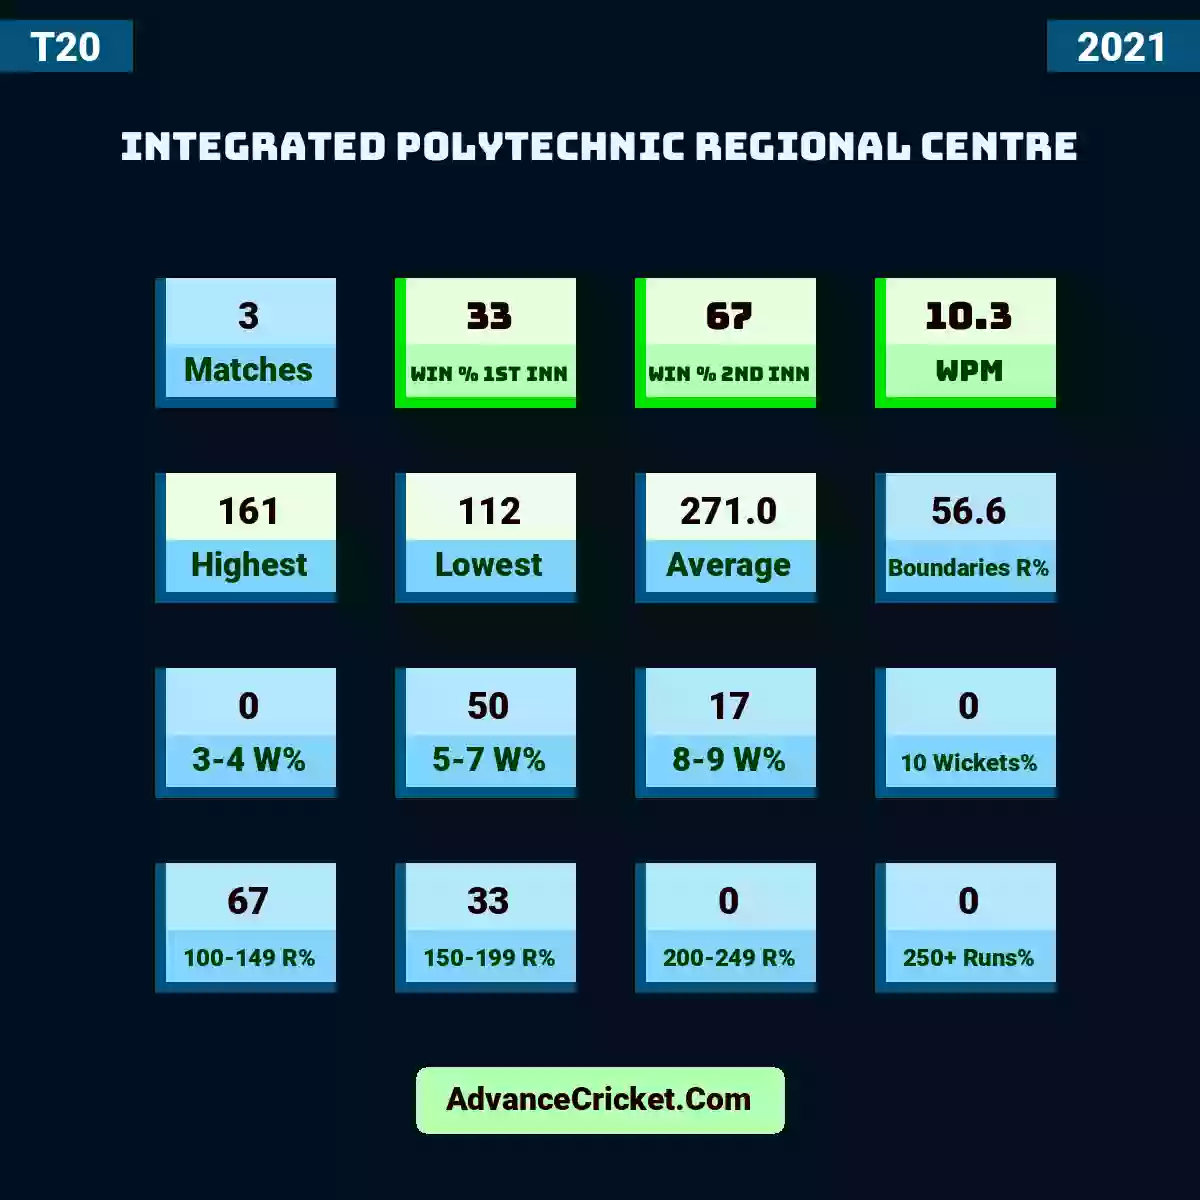 Image showing Integrated Polytechnic Regional Centre with Matches: 3, Win % 1st Inn: 33, Win % 2nd Inn: 67, WPM: 10.3, Highest: 161, Lowest: 112, Average: 271.0, Boundaries R%: 56.6, 3-4 W%: 0, 5-7 W%: 50, 8-9 W%: 17, 10 Wickets%: 0, 100-149 R%: 67, 150-199 R%: 33, 200-249 R%: 0, 250+ Runs%: 0.